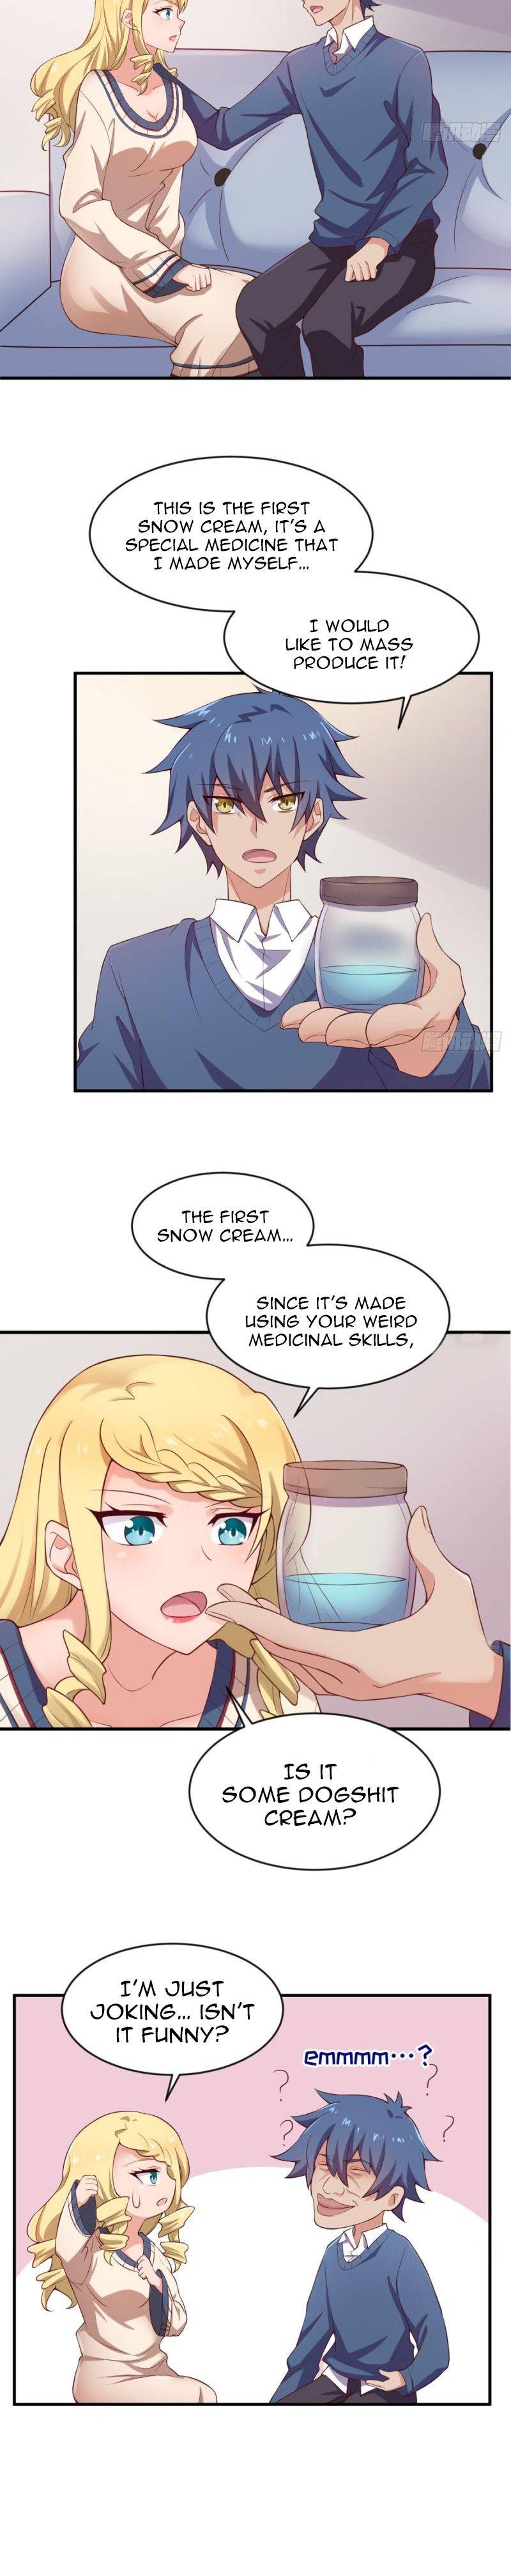 Goddess's Personal Doctor - Page 2